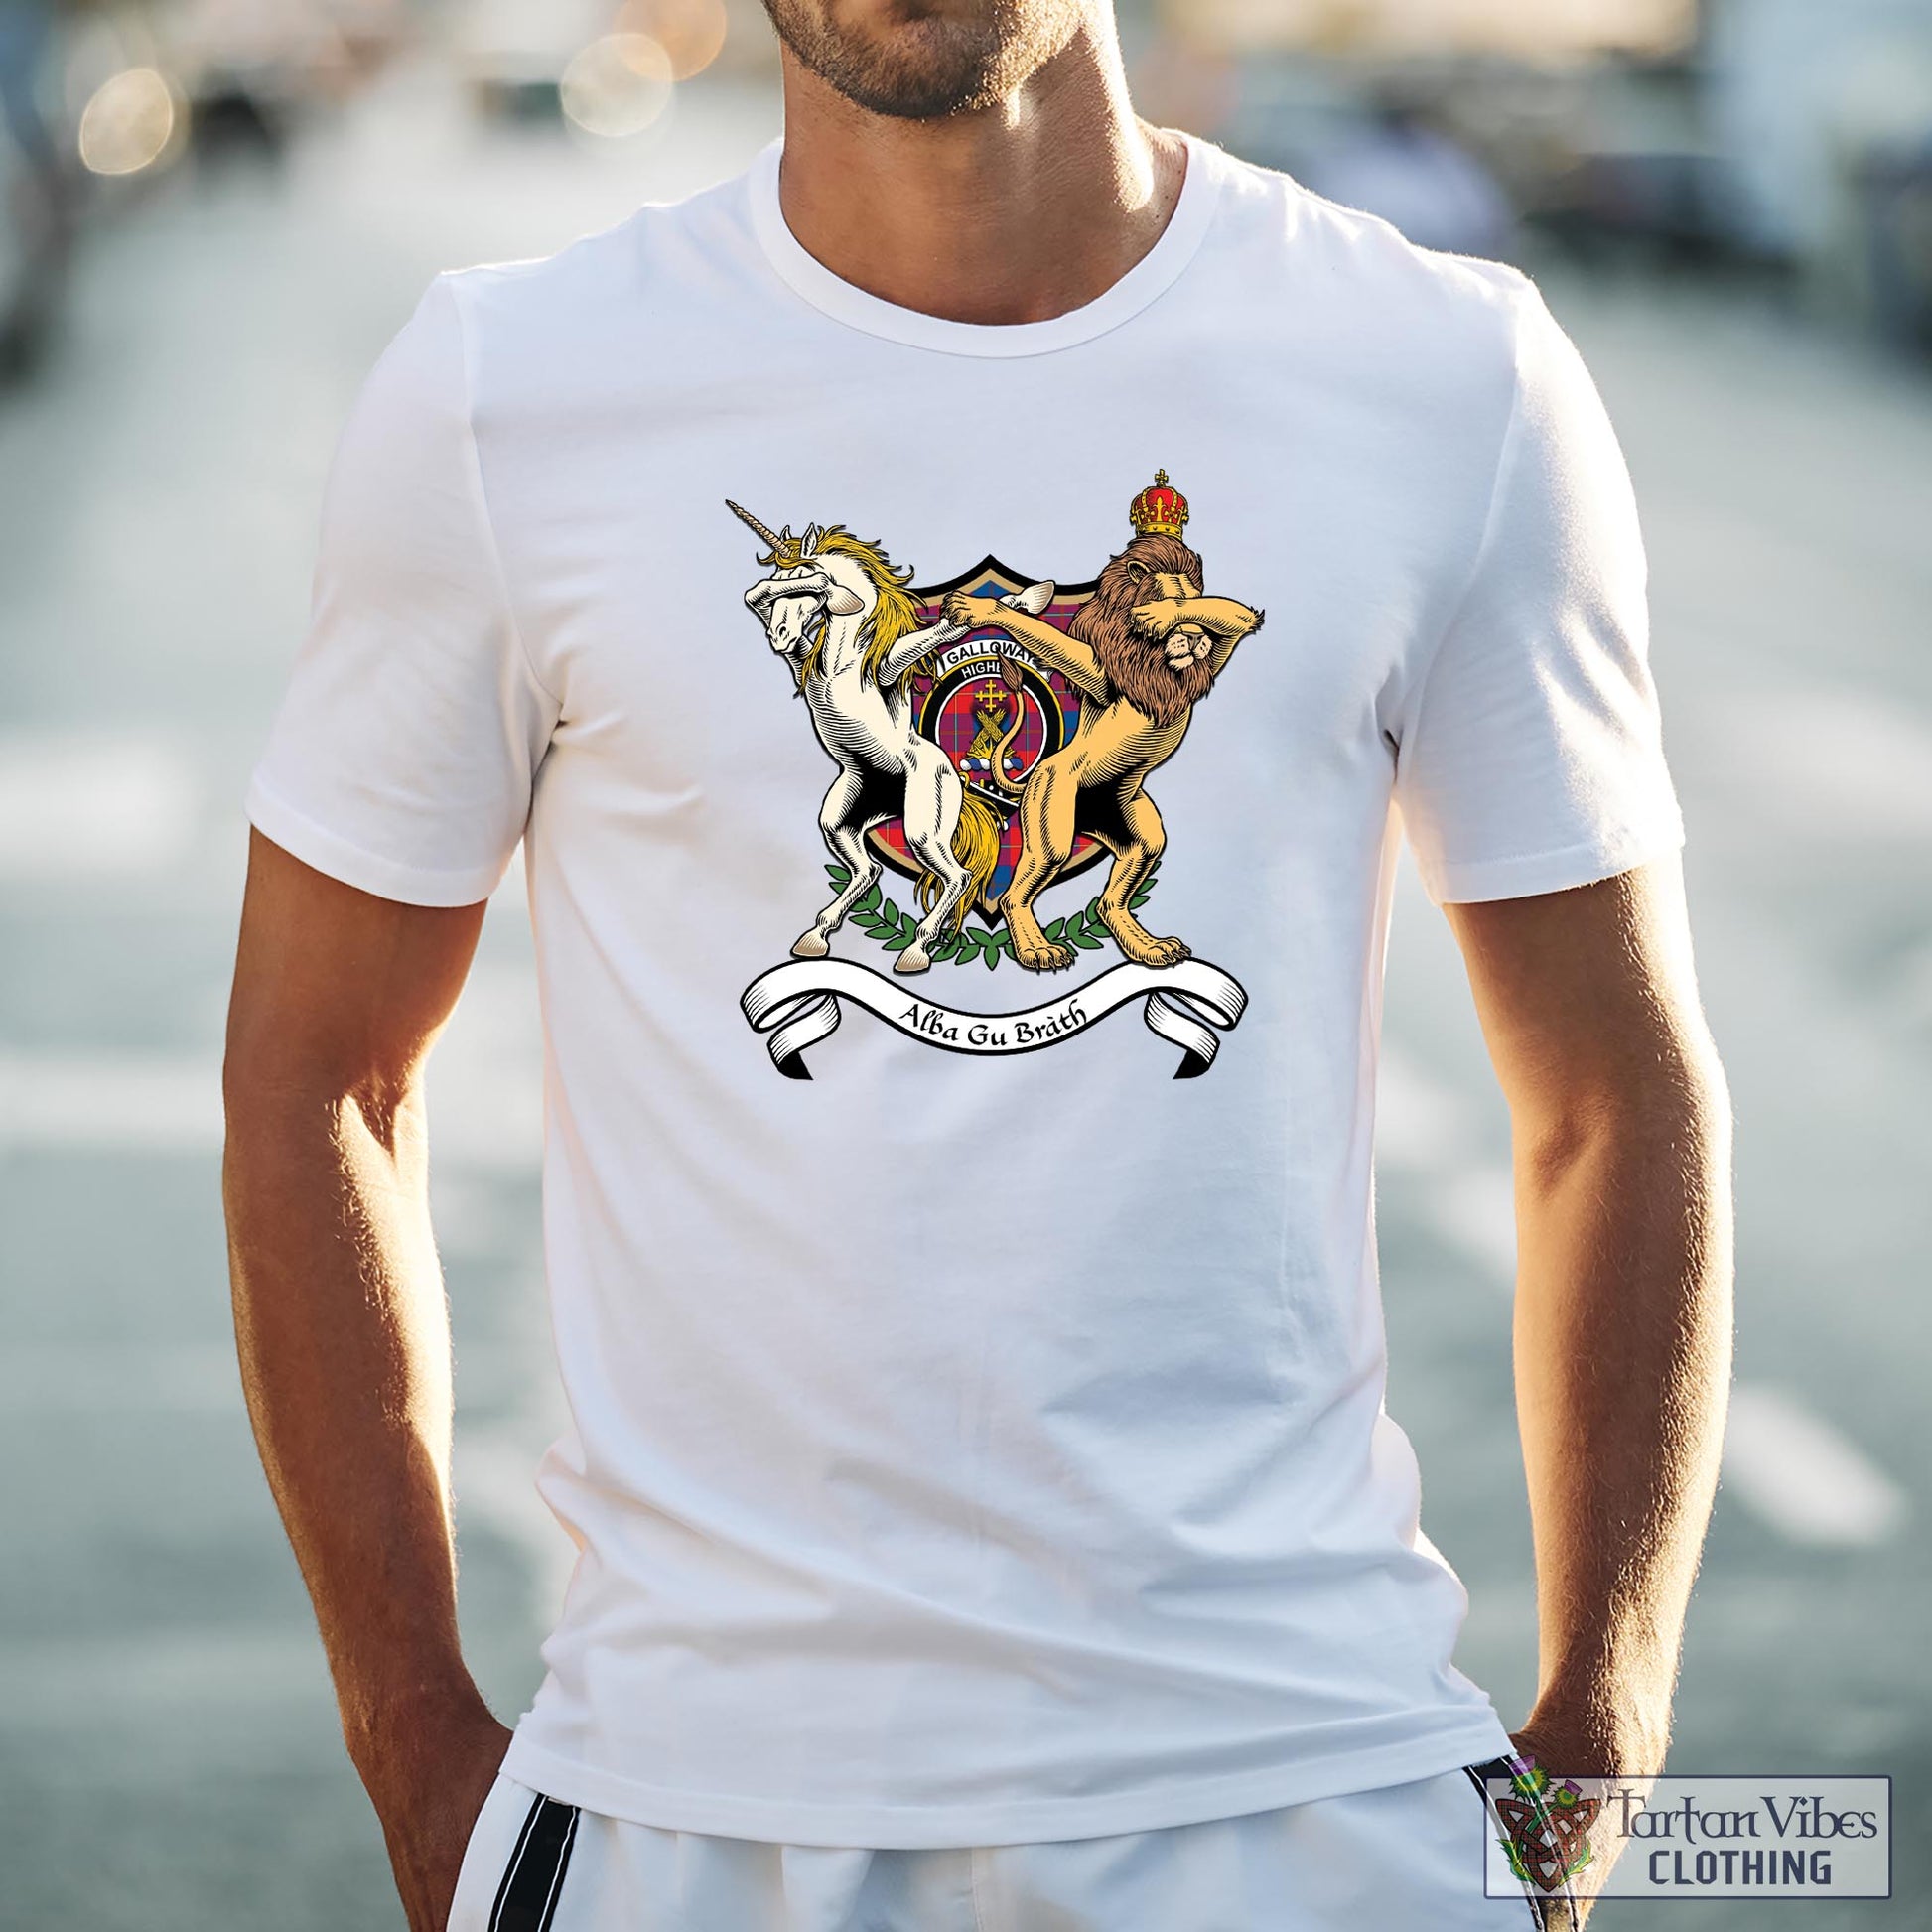 Tartan Vibes Clothing Galloway Red Family Crest Cotton Men's T-Shirt with Scotland Royal Coat Of Arm Funny Style